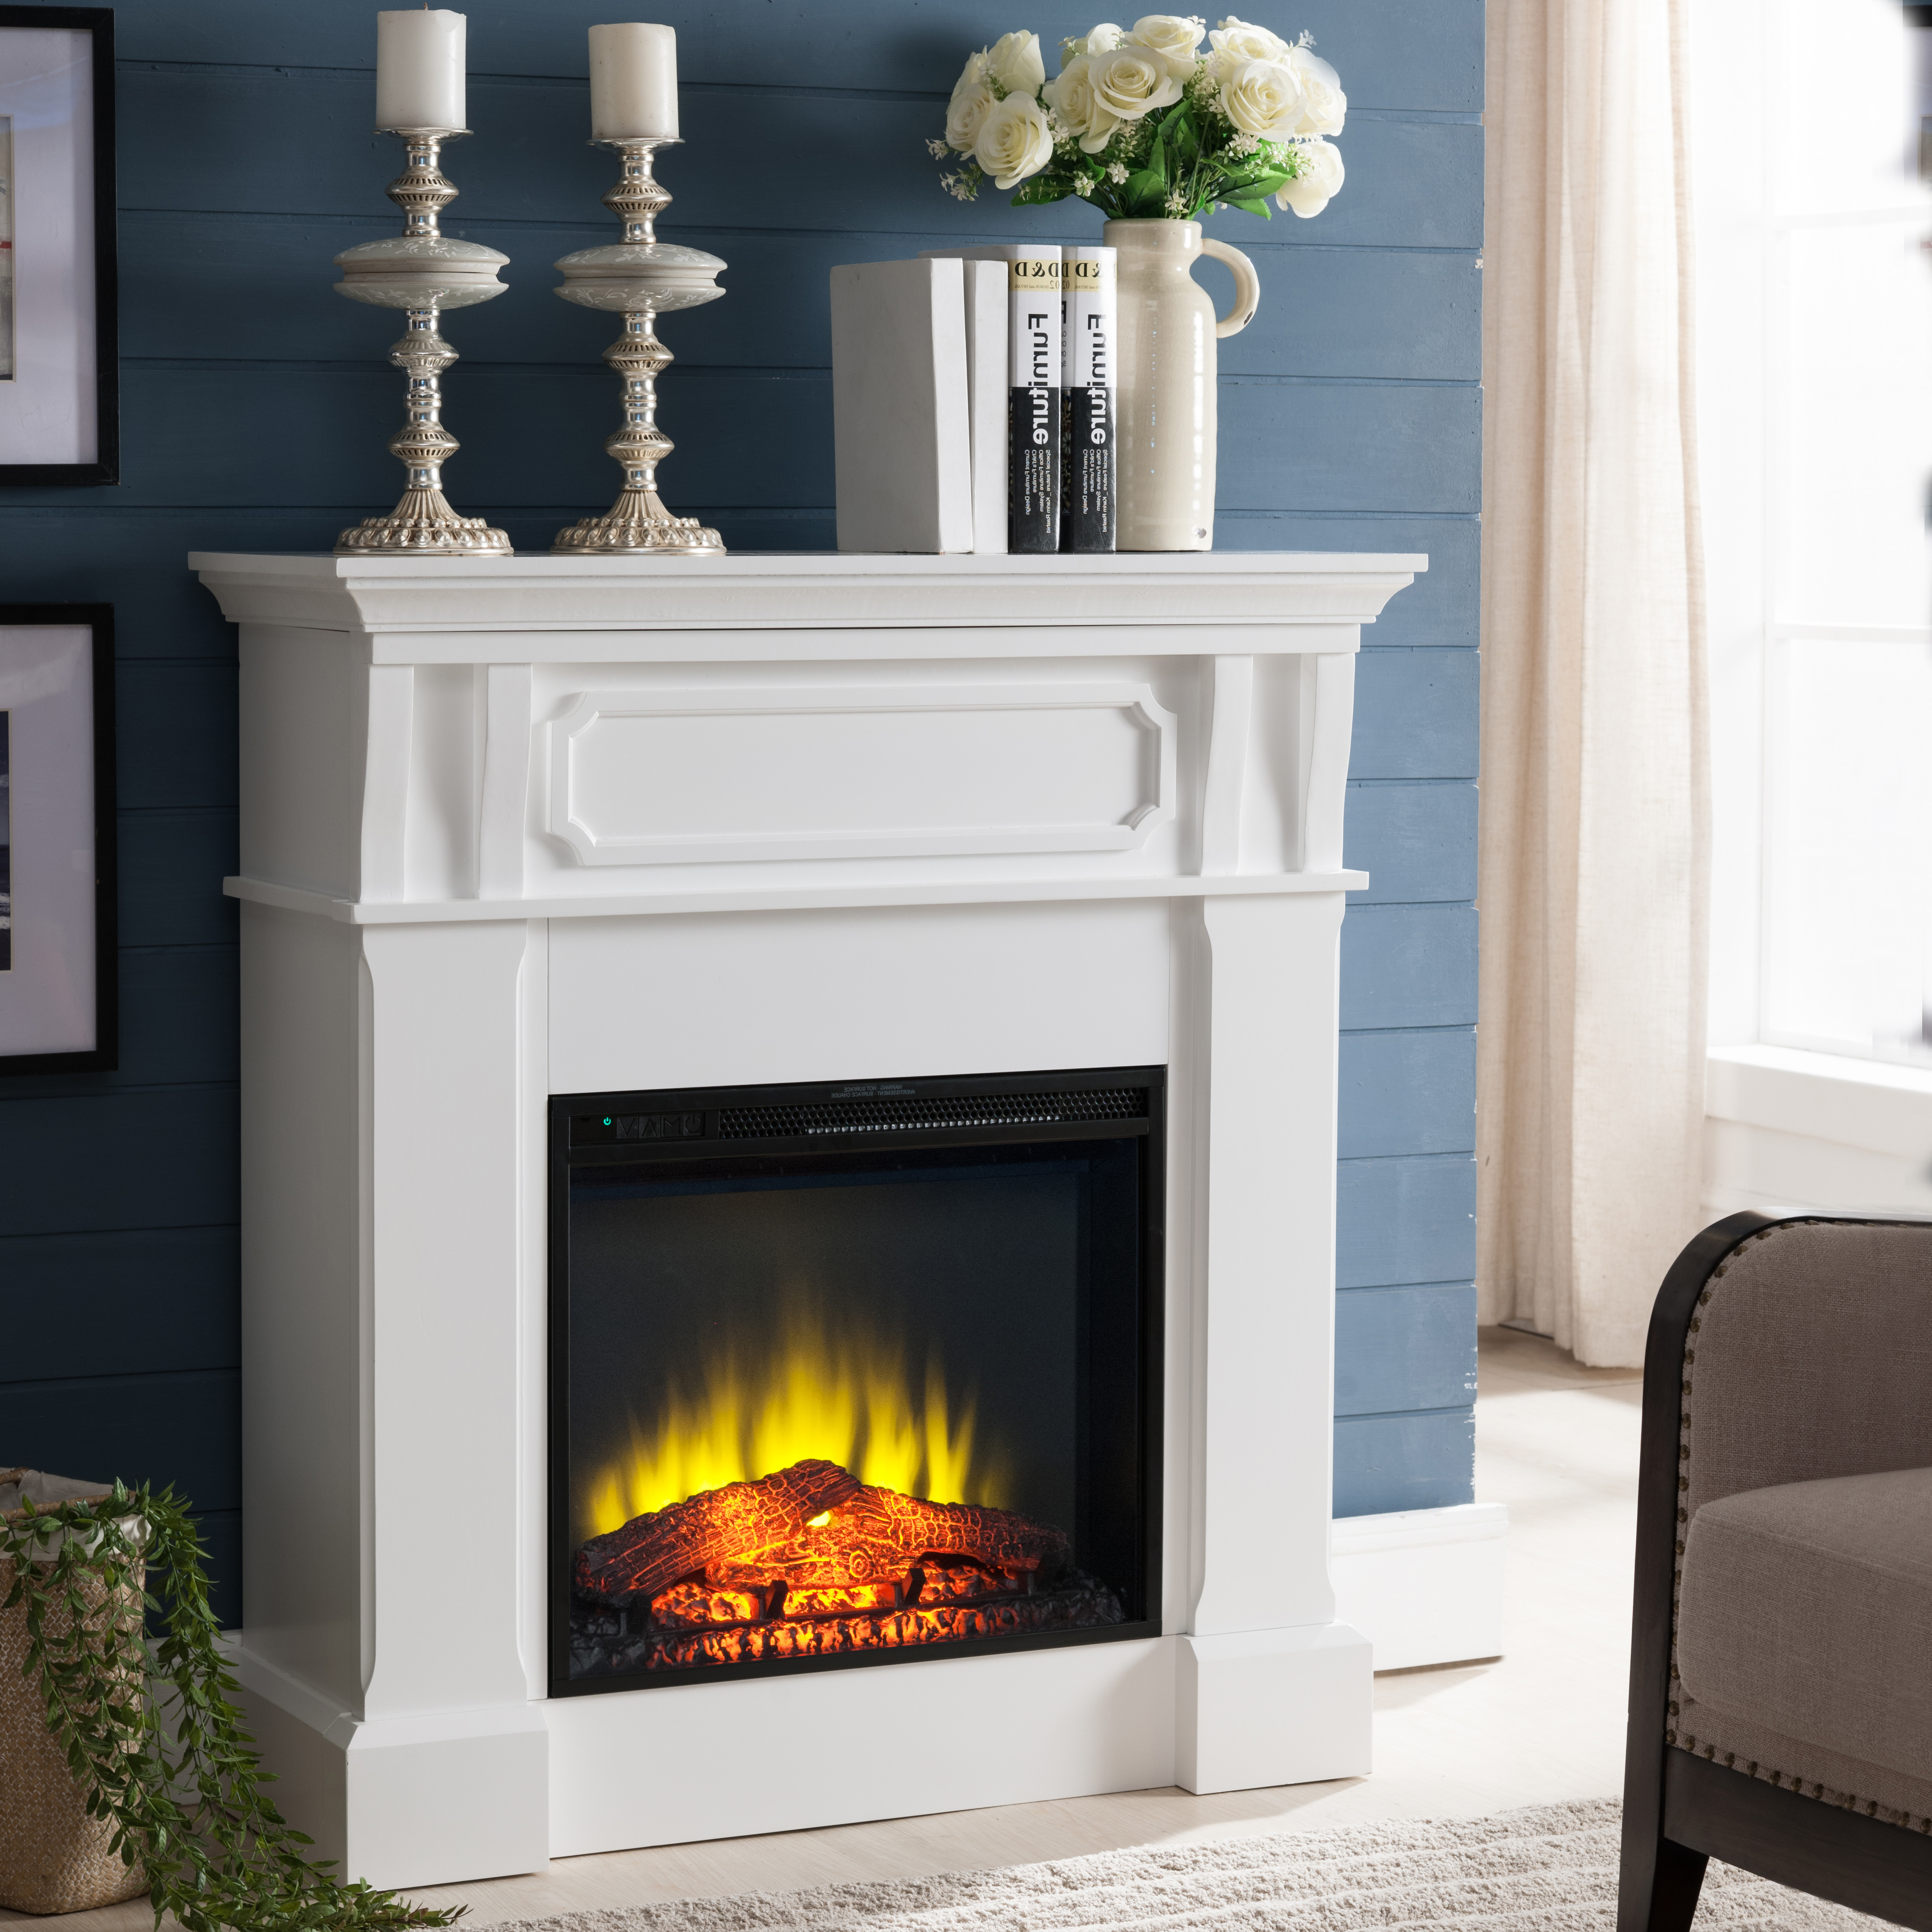 Prokonian Free stand Electric Fireplace with 40" Mantel, White - image 1 of 5